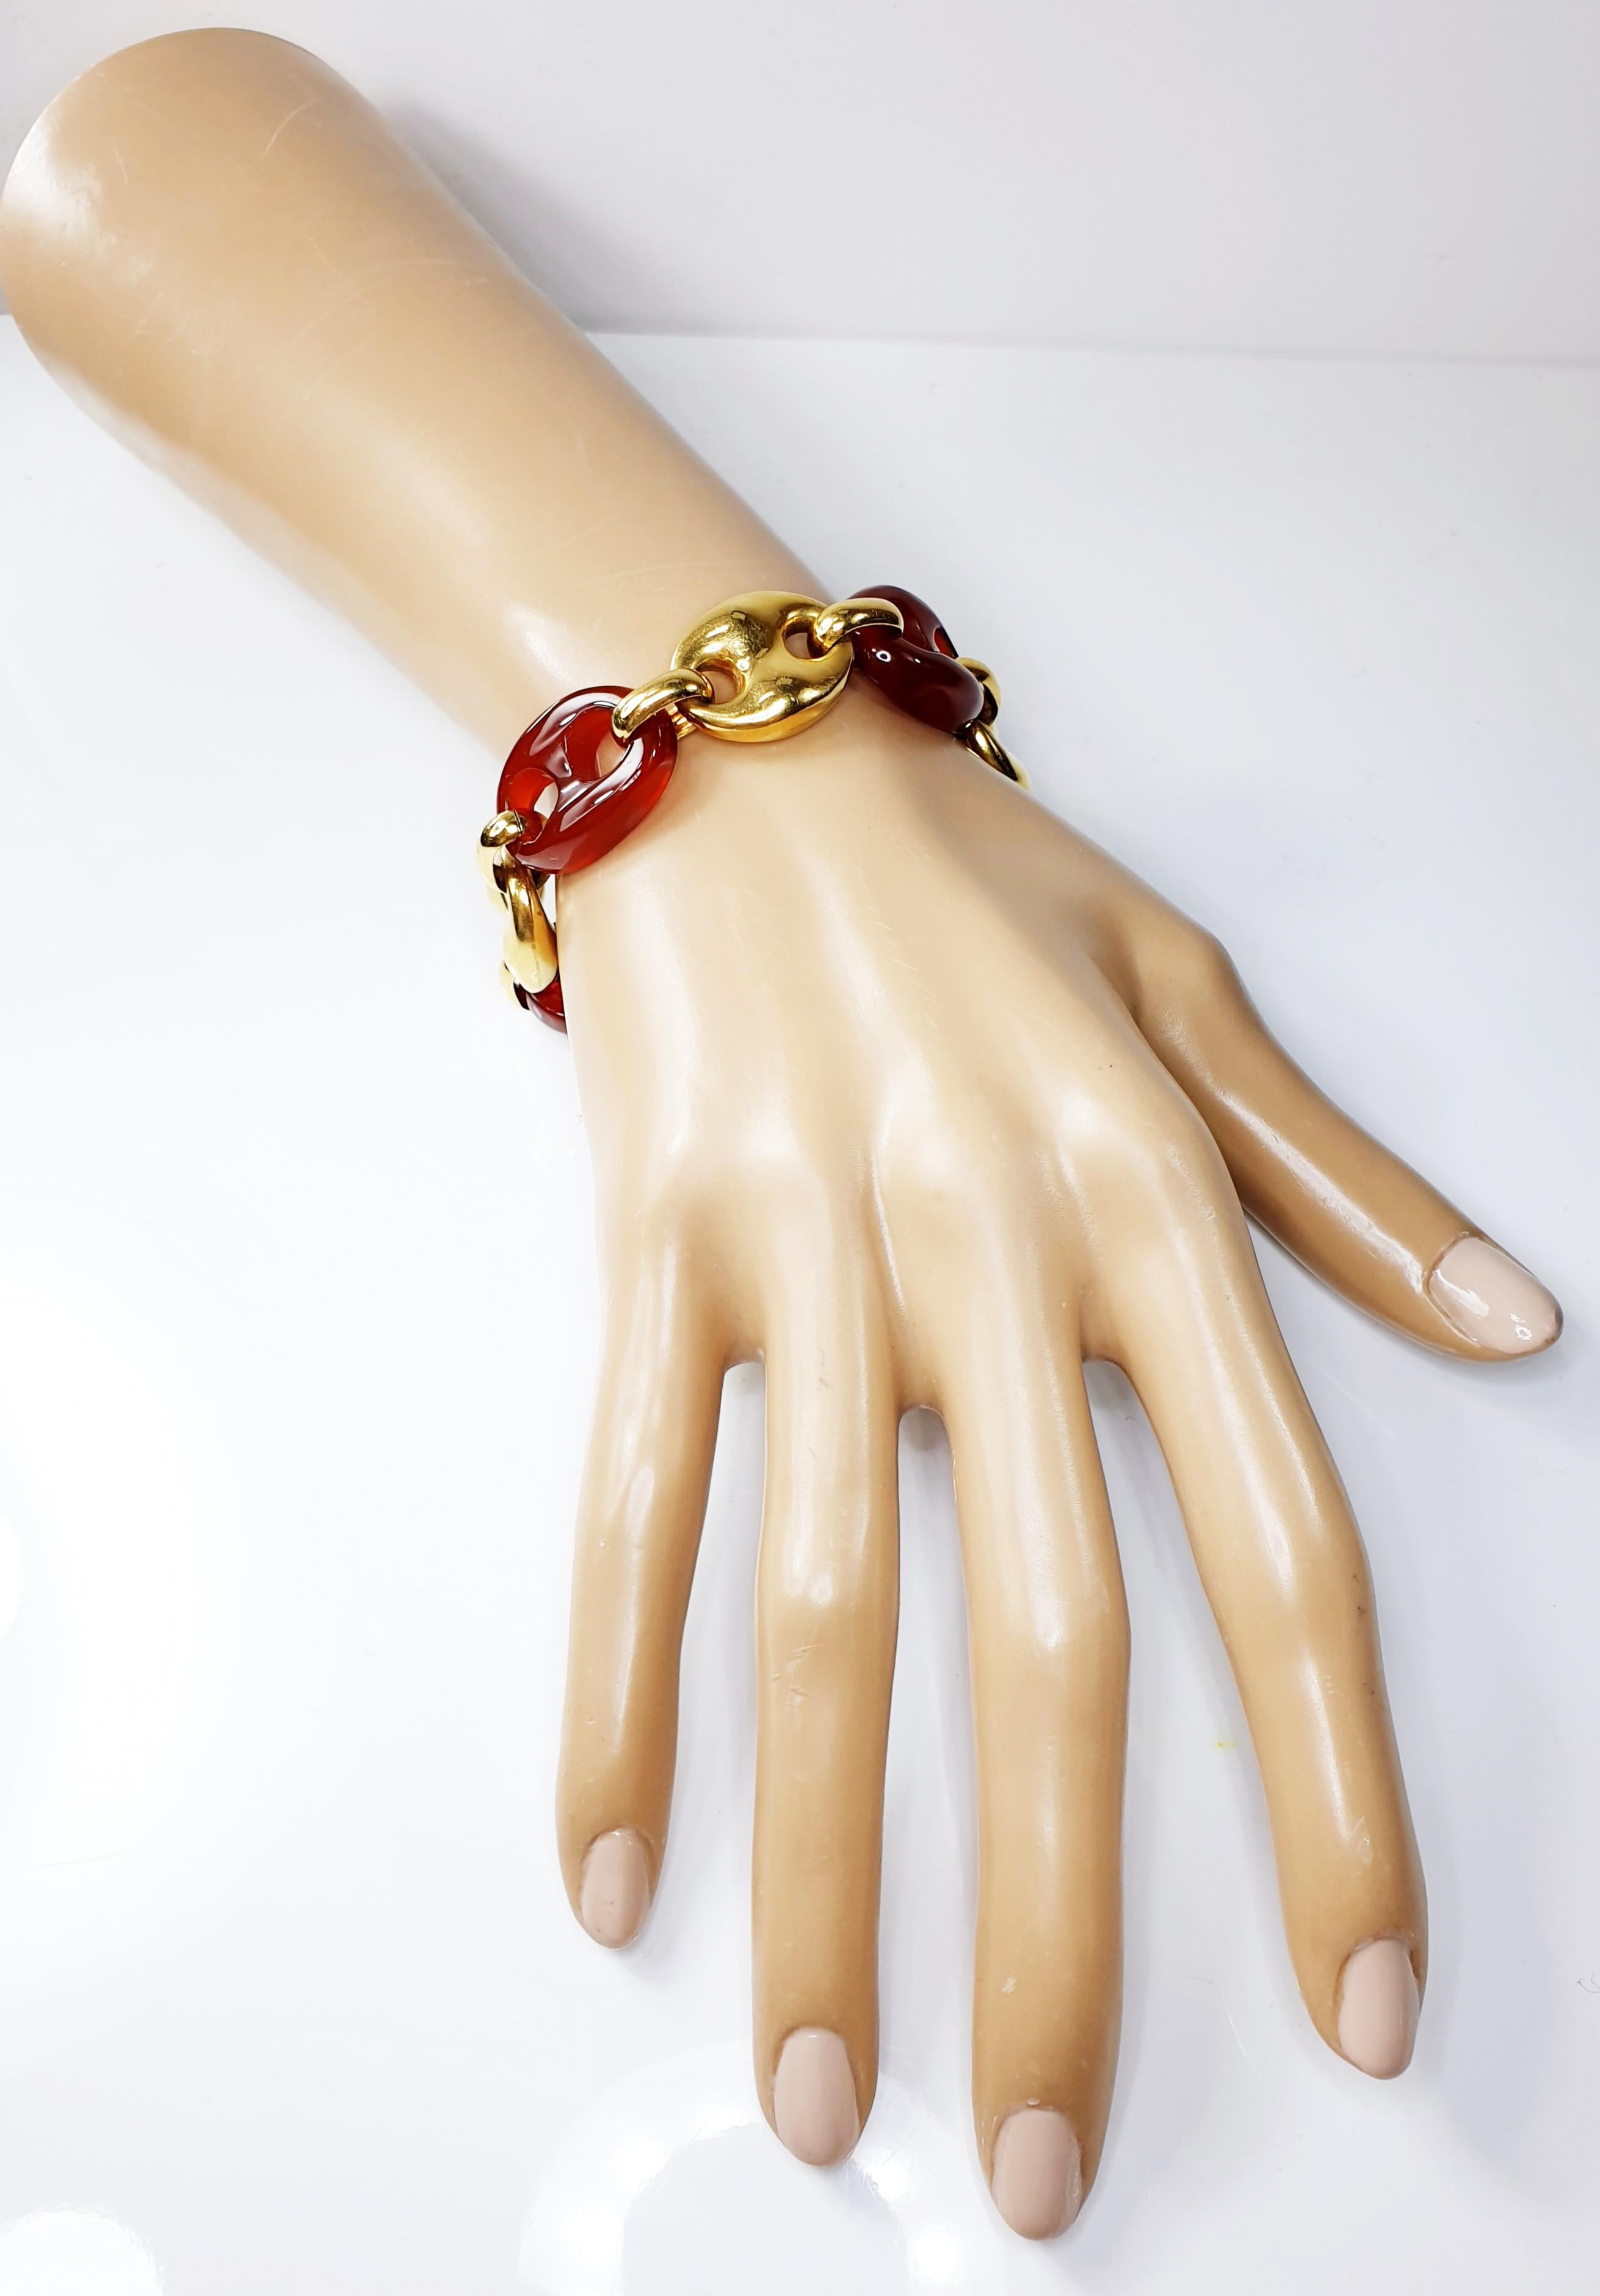 Cabochon Nautical Anchor Link Bracelet 18 Karat Solid Yellow Gold and Red Carnelian For Sale